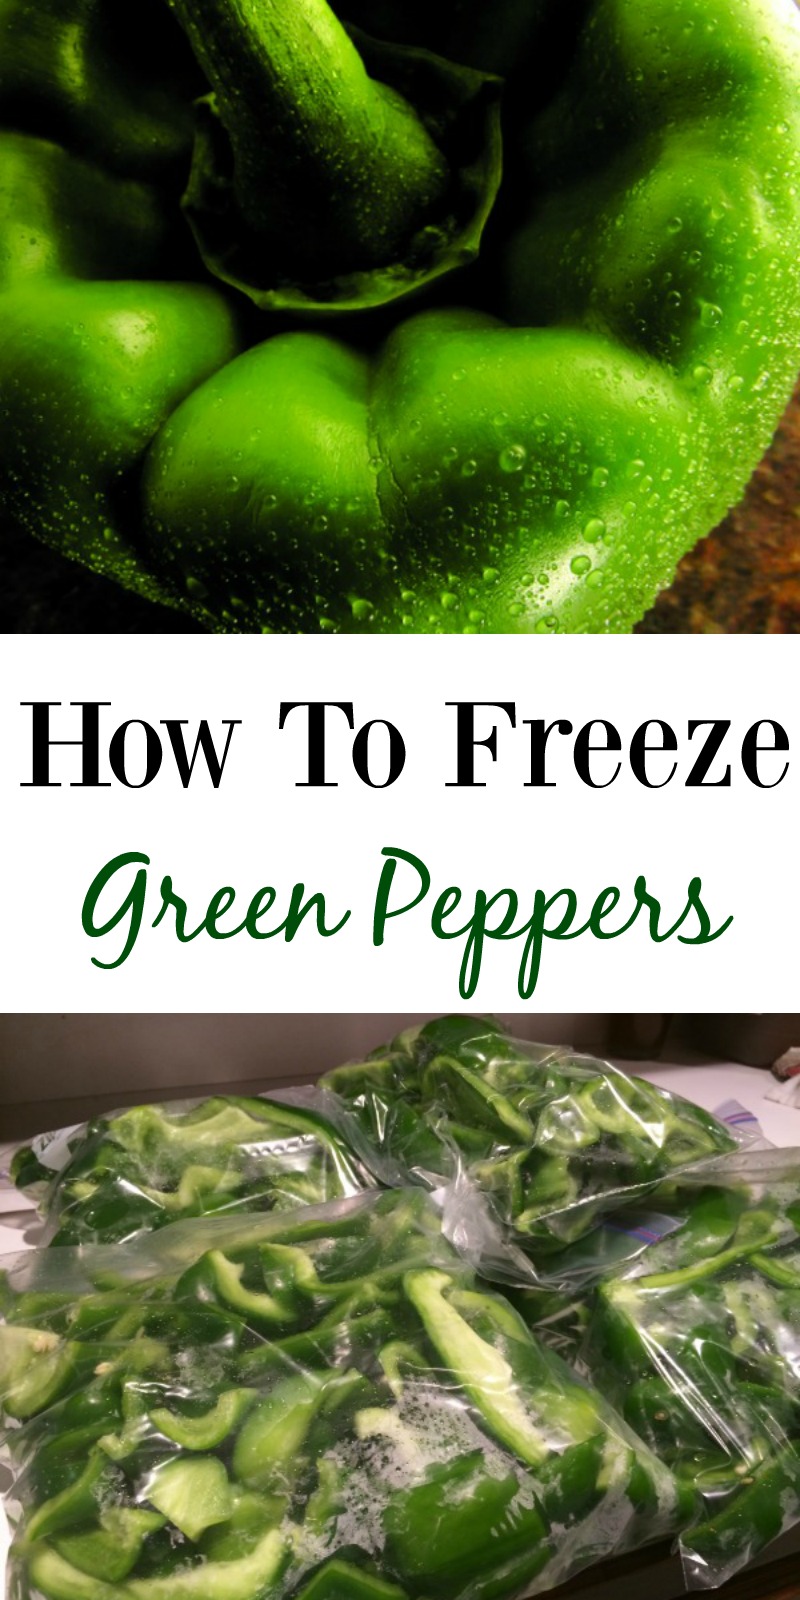 How to Freeze Green Peppers--this frugal trick will show you how to freeze green peppers, allowing you to save money by buying in bulk when peppers are on sale!